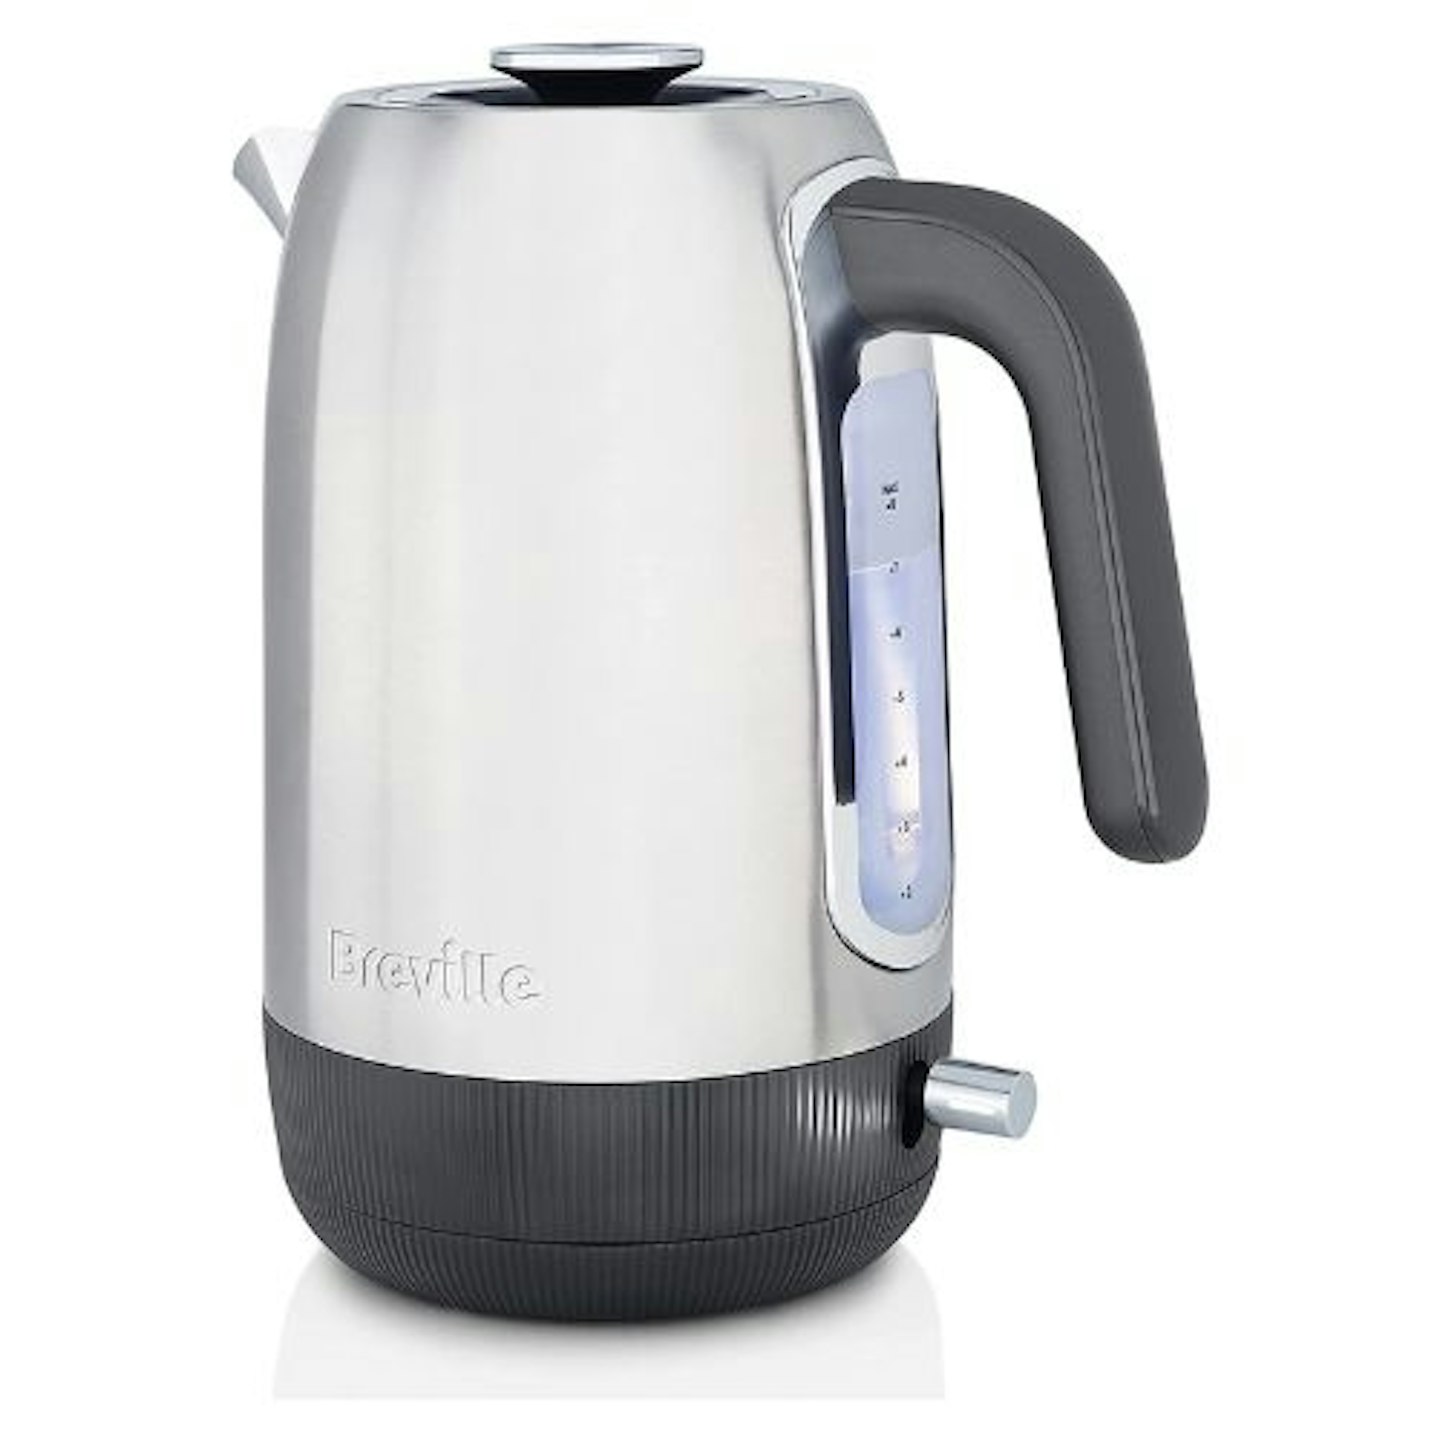 Breville Edge Electric Kettle | 1.7 Litre | Glows When Hot to Avoid Re-Boiling | 3kW Fast Boil | Brushed Stainless Steel [VKT192]